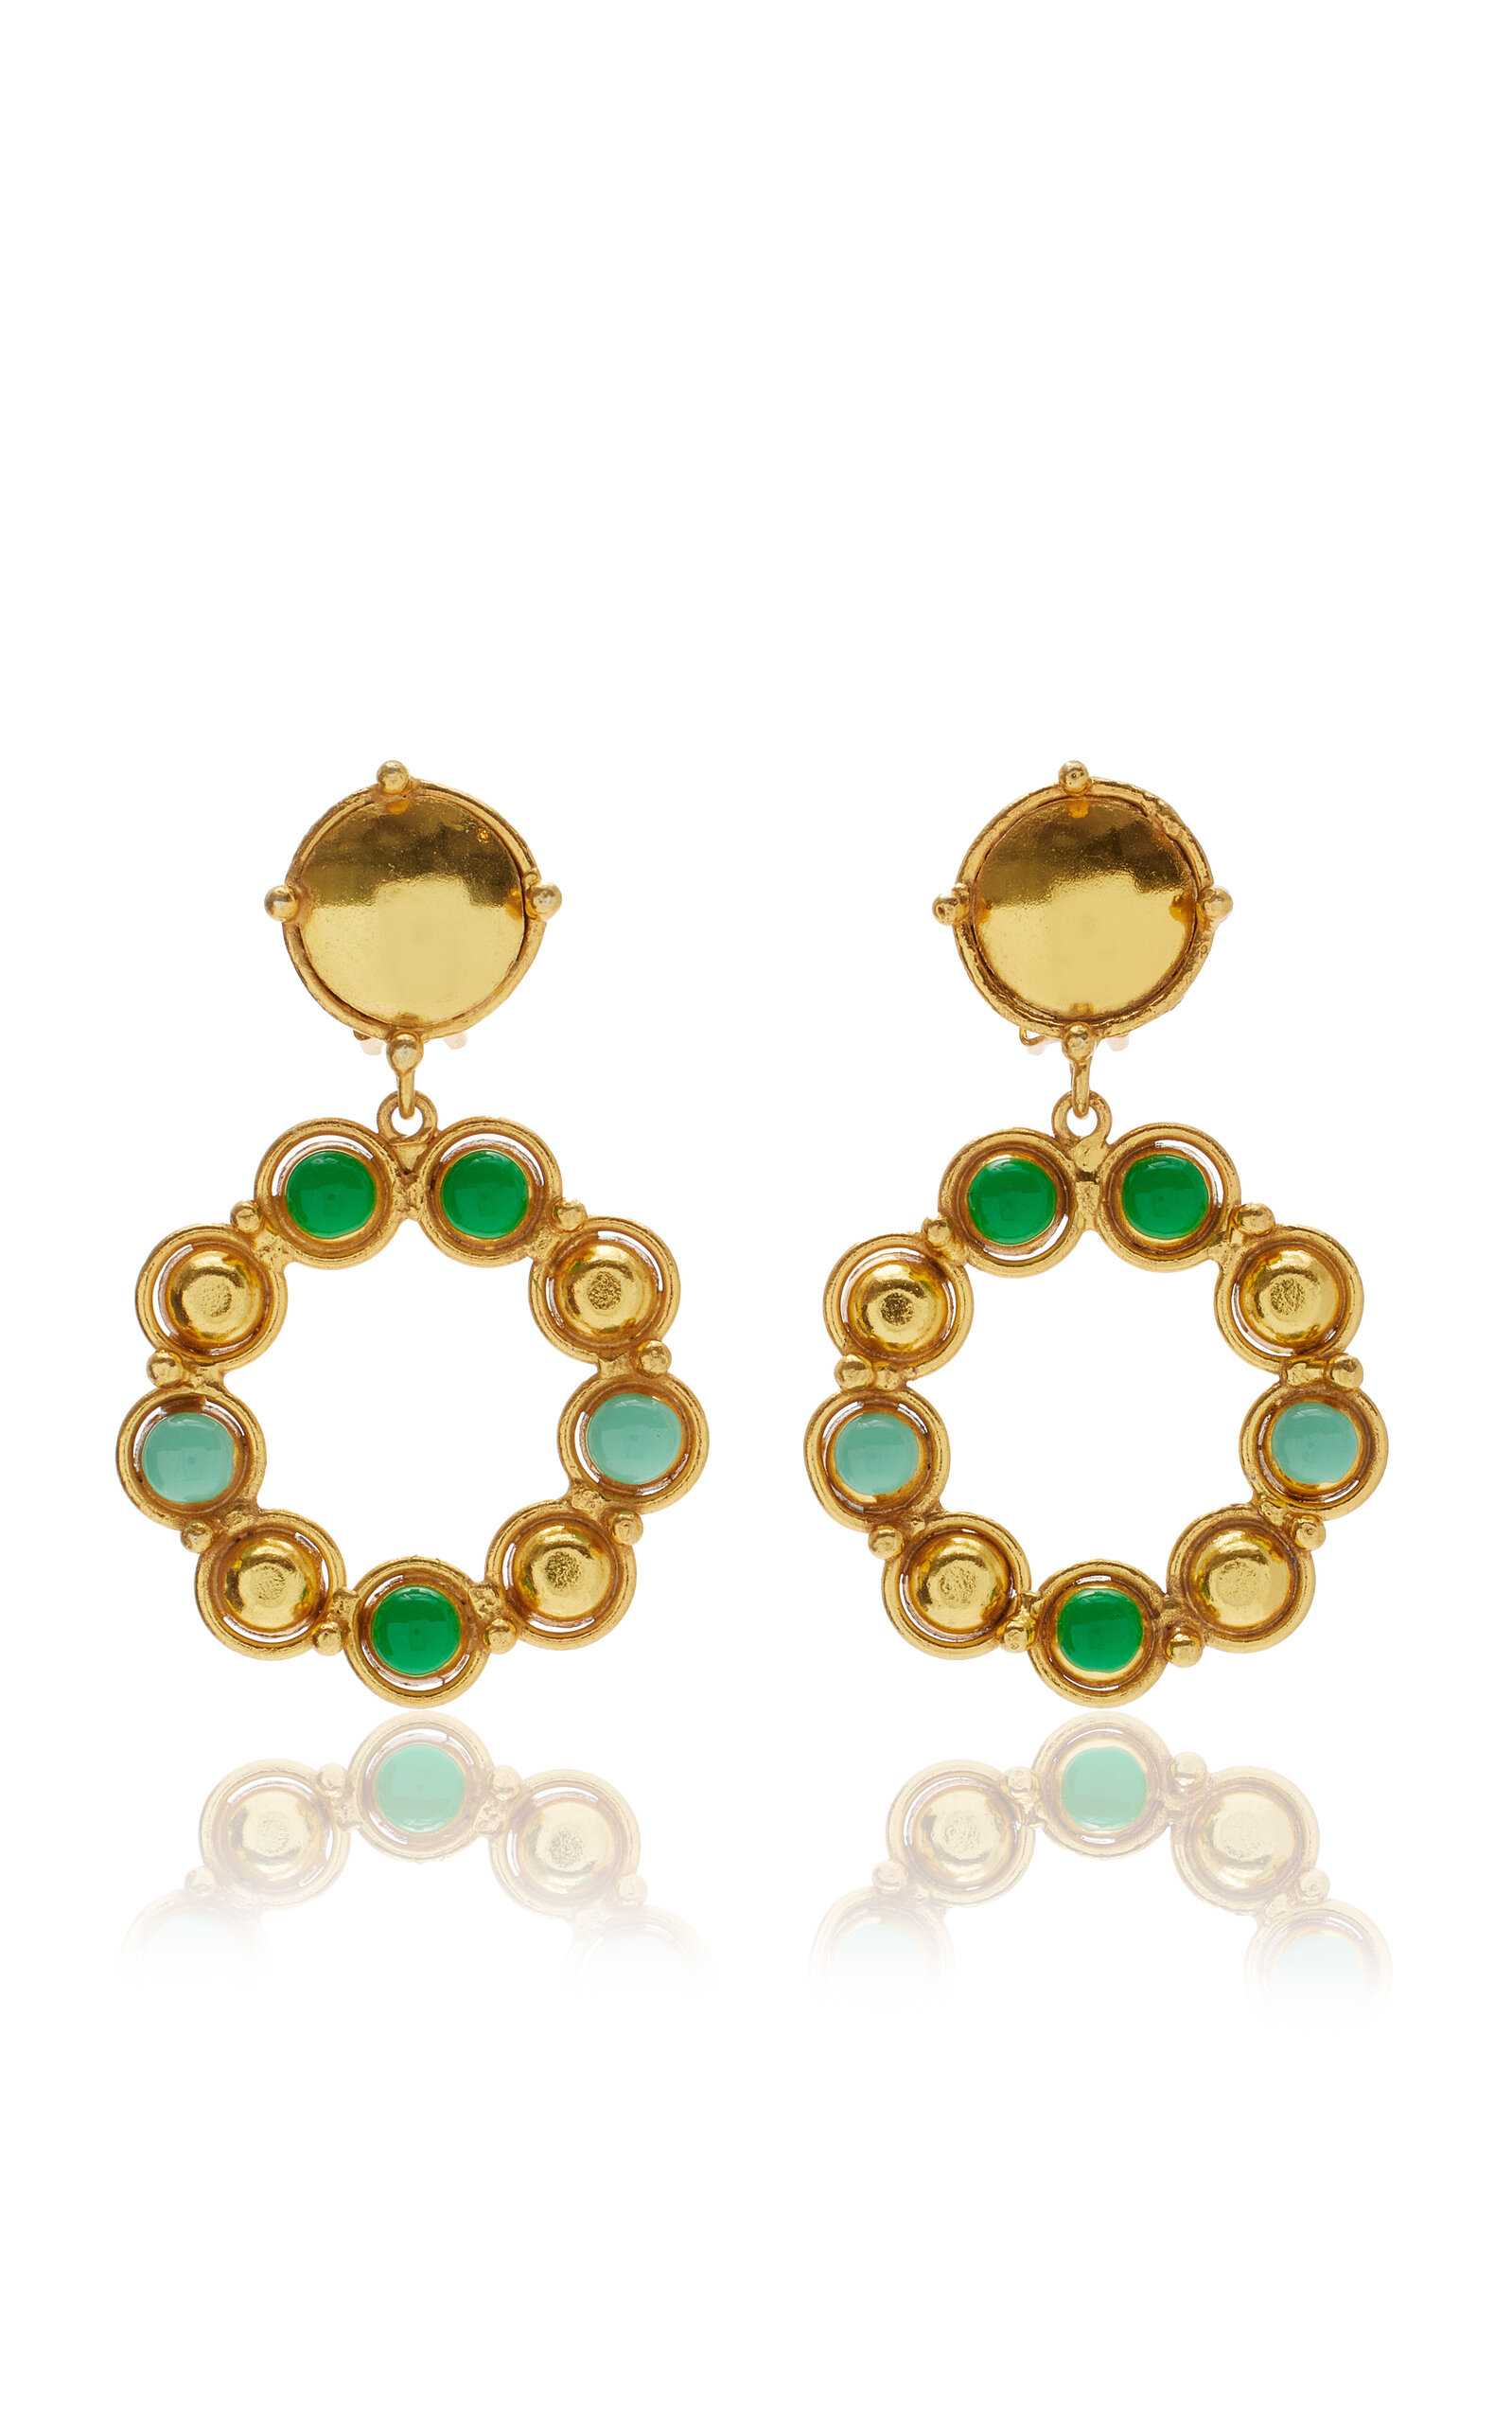 Flower Candies 22K Gold-Plated and Enamel Earrings